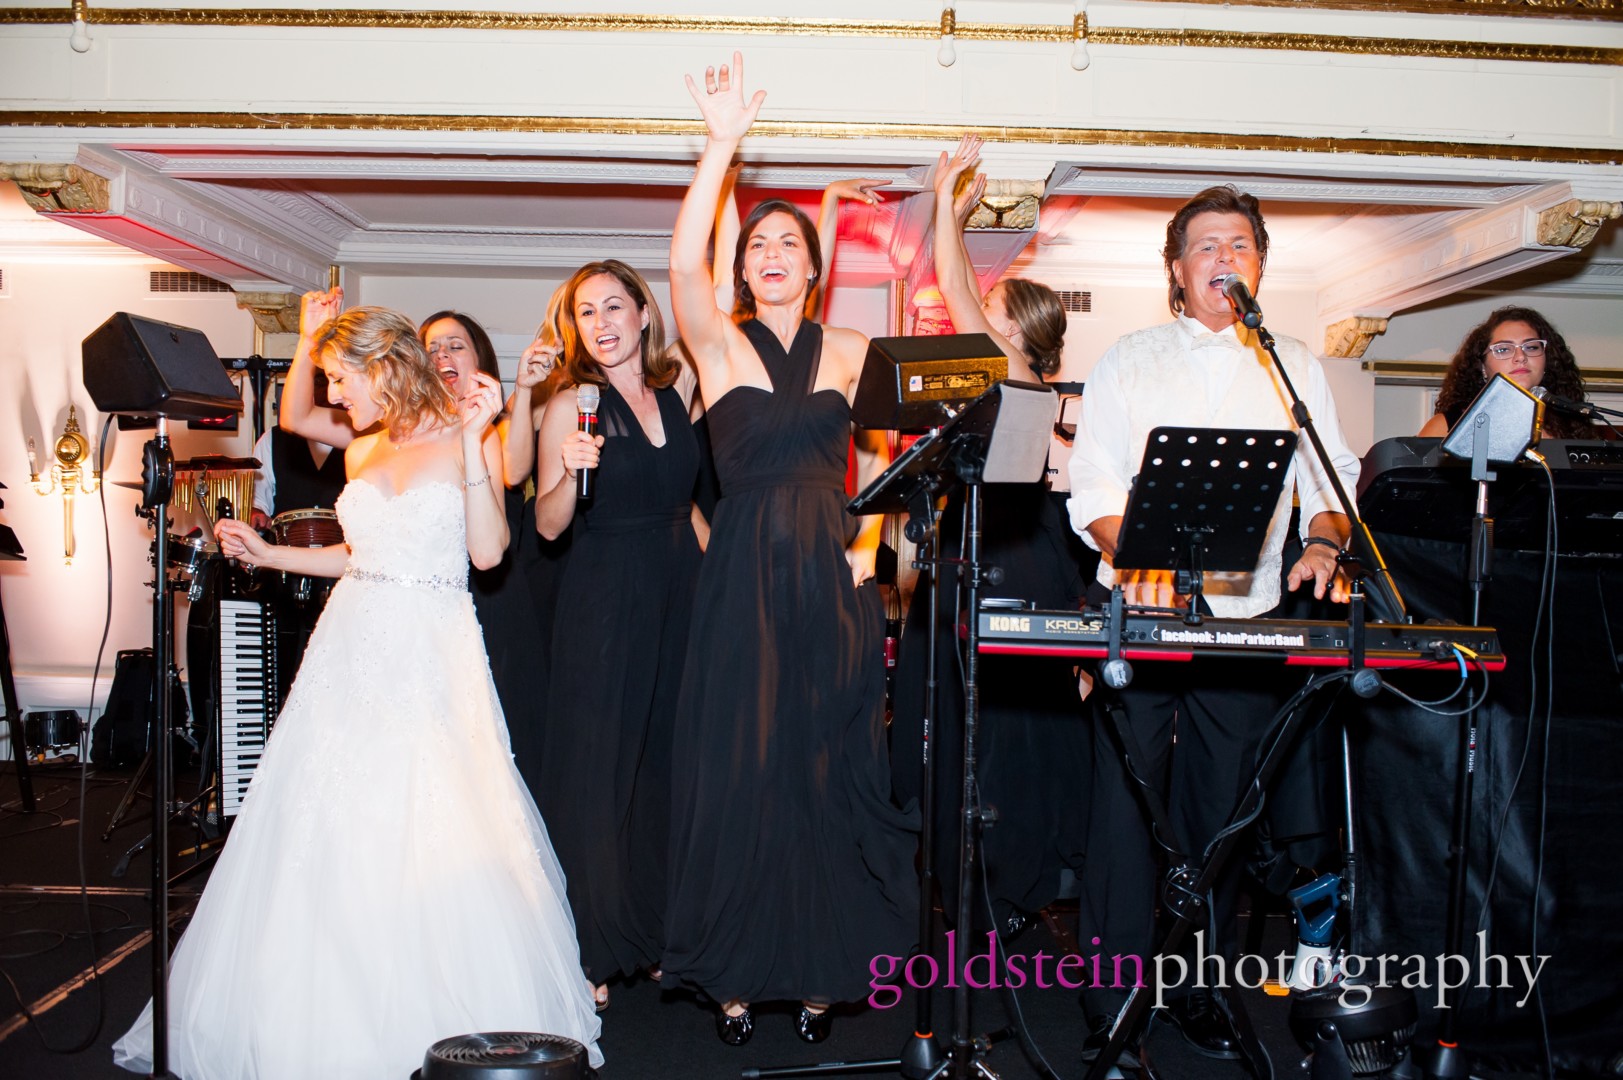 John Parker Band @ William Penn Hotel with Bridesmaids and Bride on stage with band